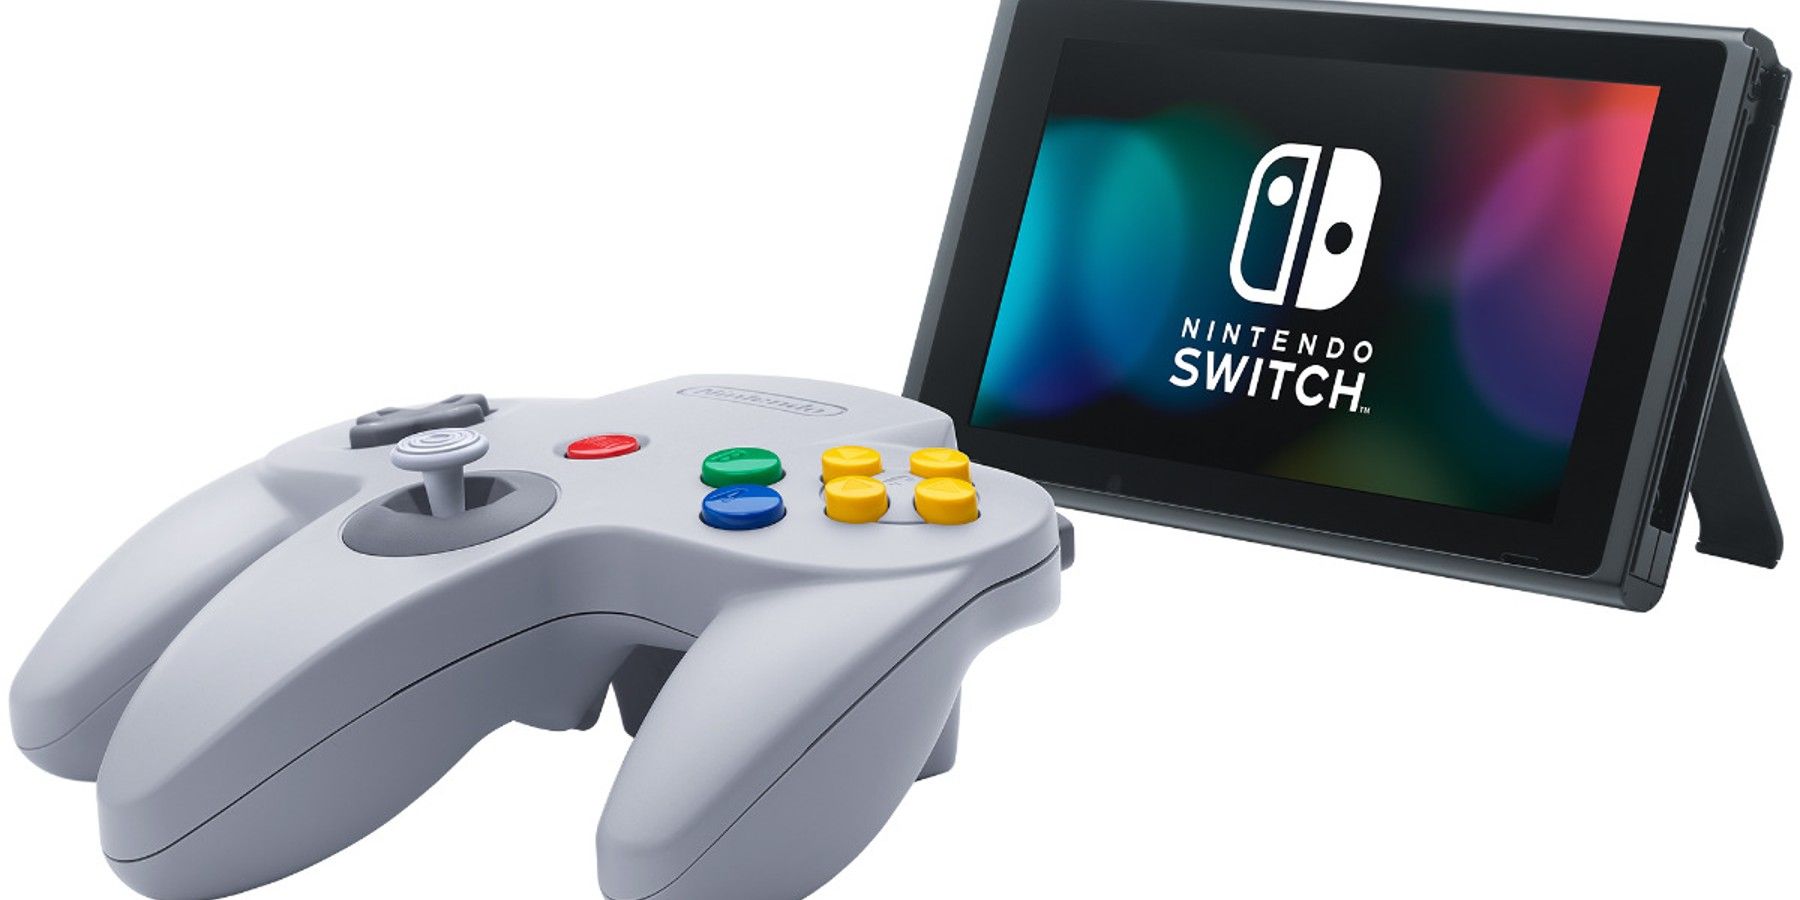 Nintendo 64 Switch Controllers Likely Sold Out Until Next Year